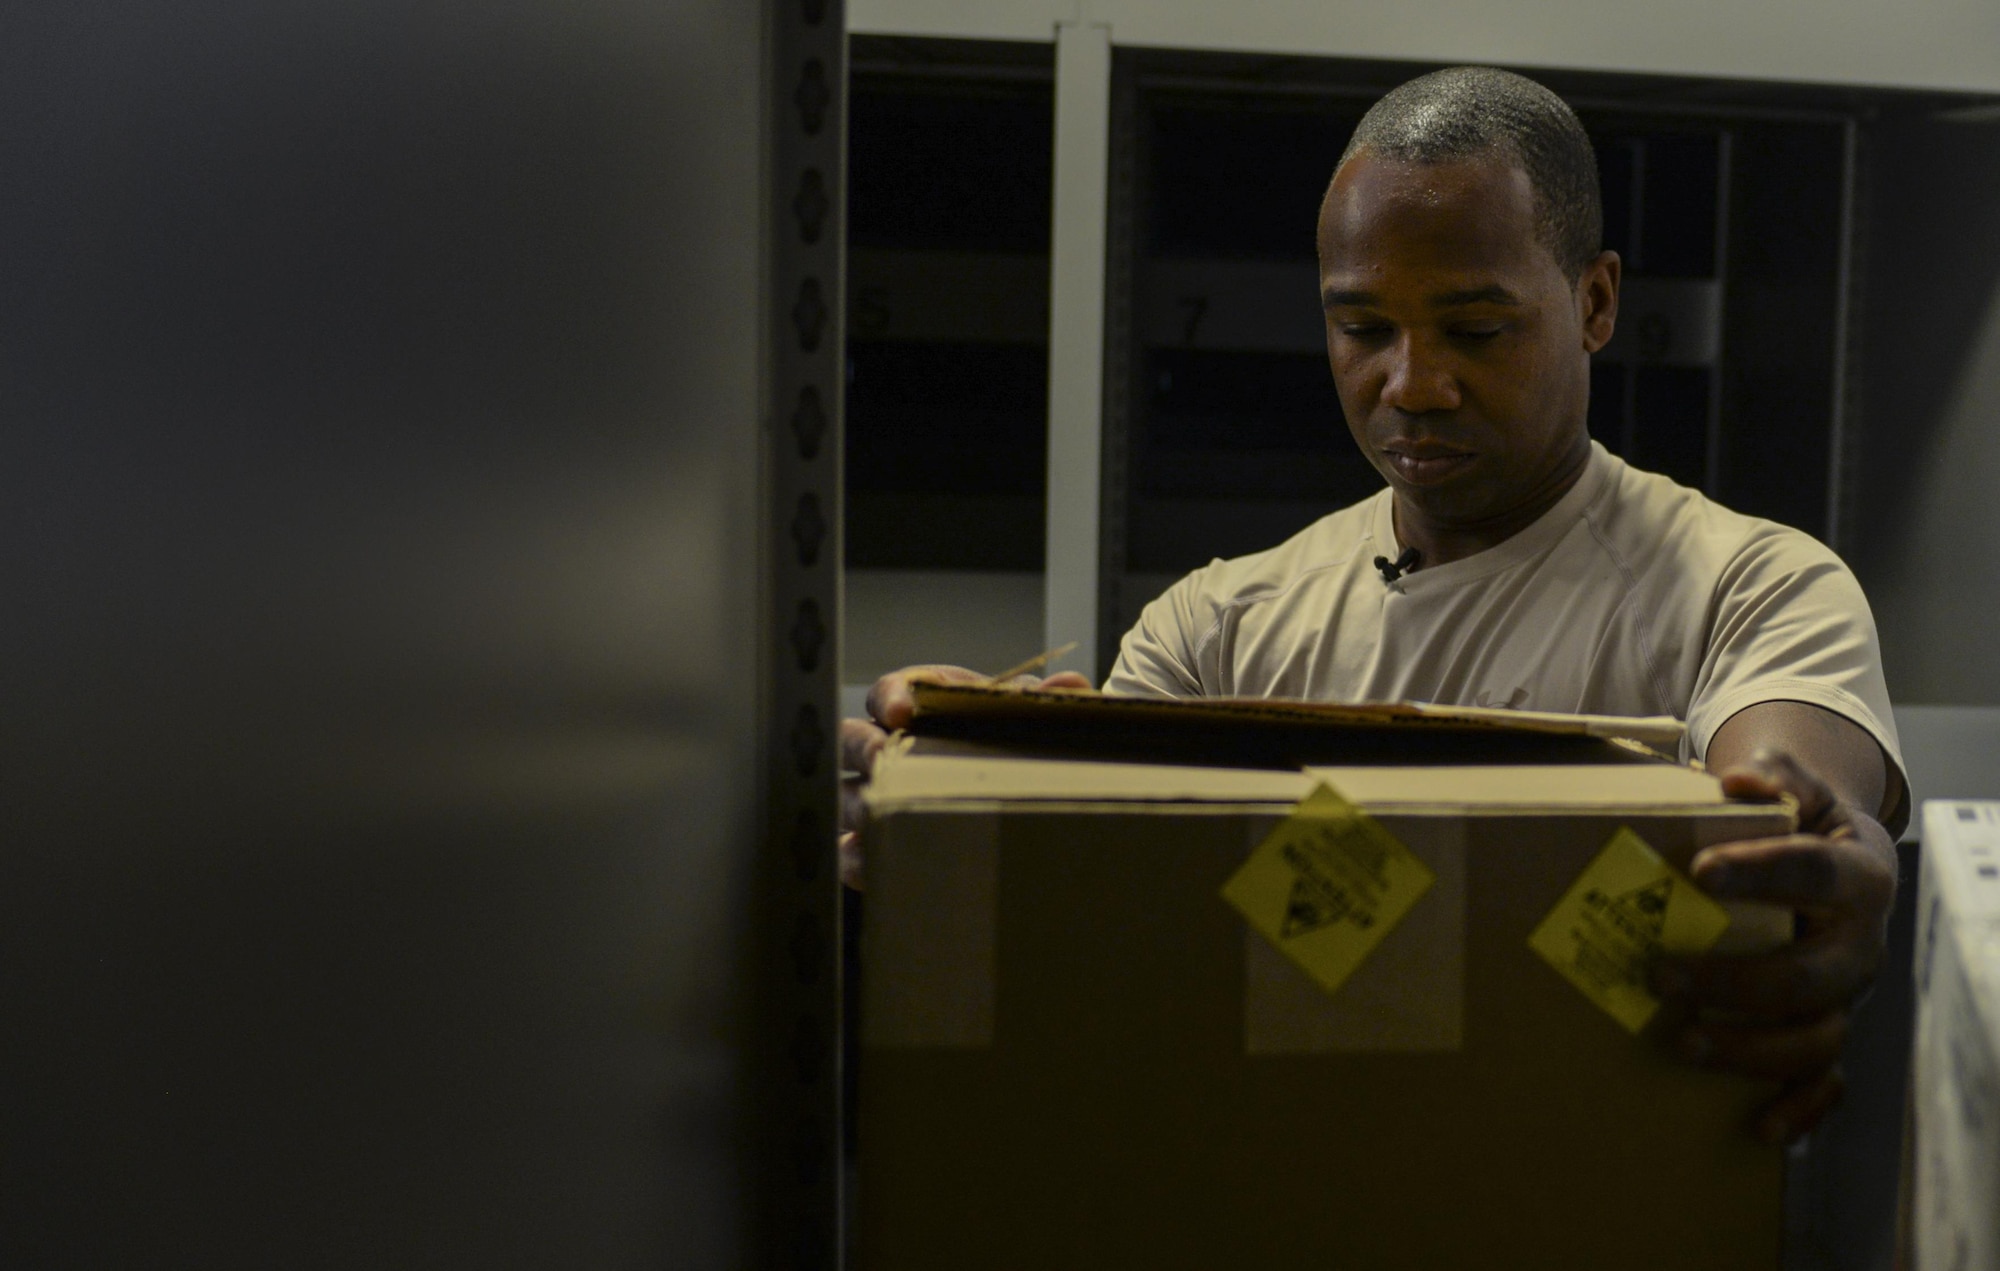 Staff Sgt. Wendell Belford, 99th Logistics Readiness Squadron F-35 aircraft parts store supervisor, checks the serial number on a box before moving it to the F-35 aircraft service center’s new location at Nellis Air Force Base, Nev., June 6, 2016. The 99th LRS F-35 aircraft parts store is a shred that has only one singular mission: to support the F-35 program. (U.S. Air Force photo by Airman 1st Class Kevin Tanenbaum)